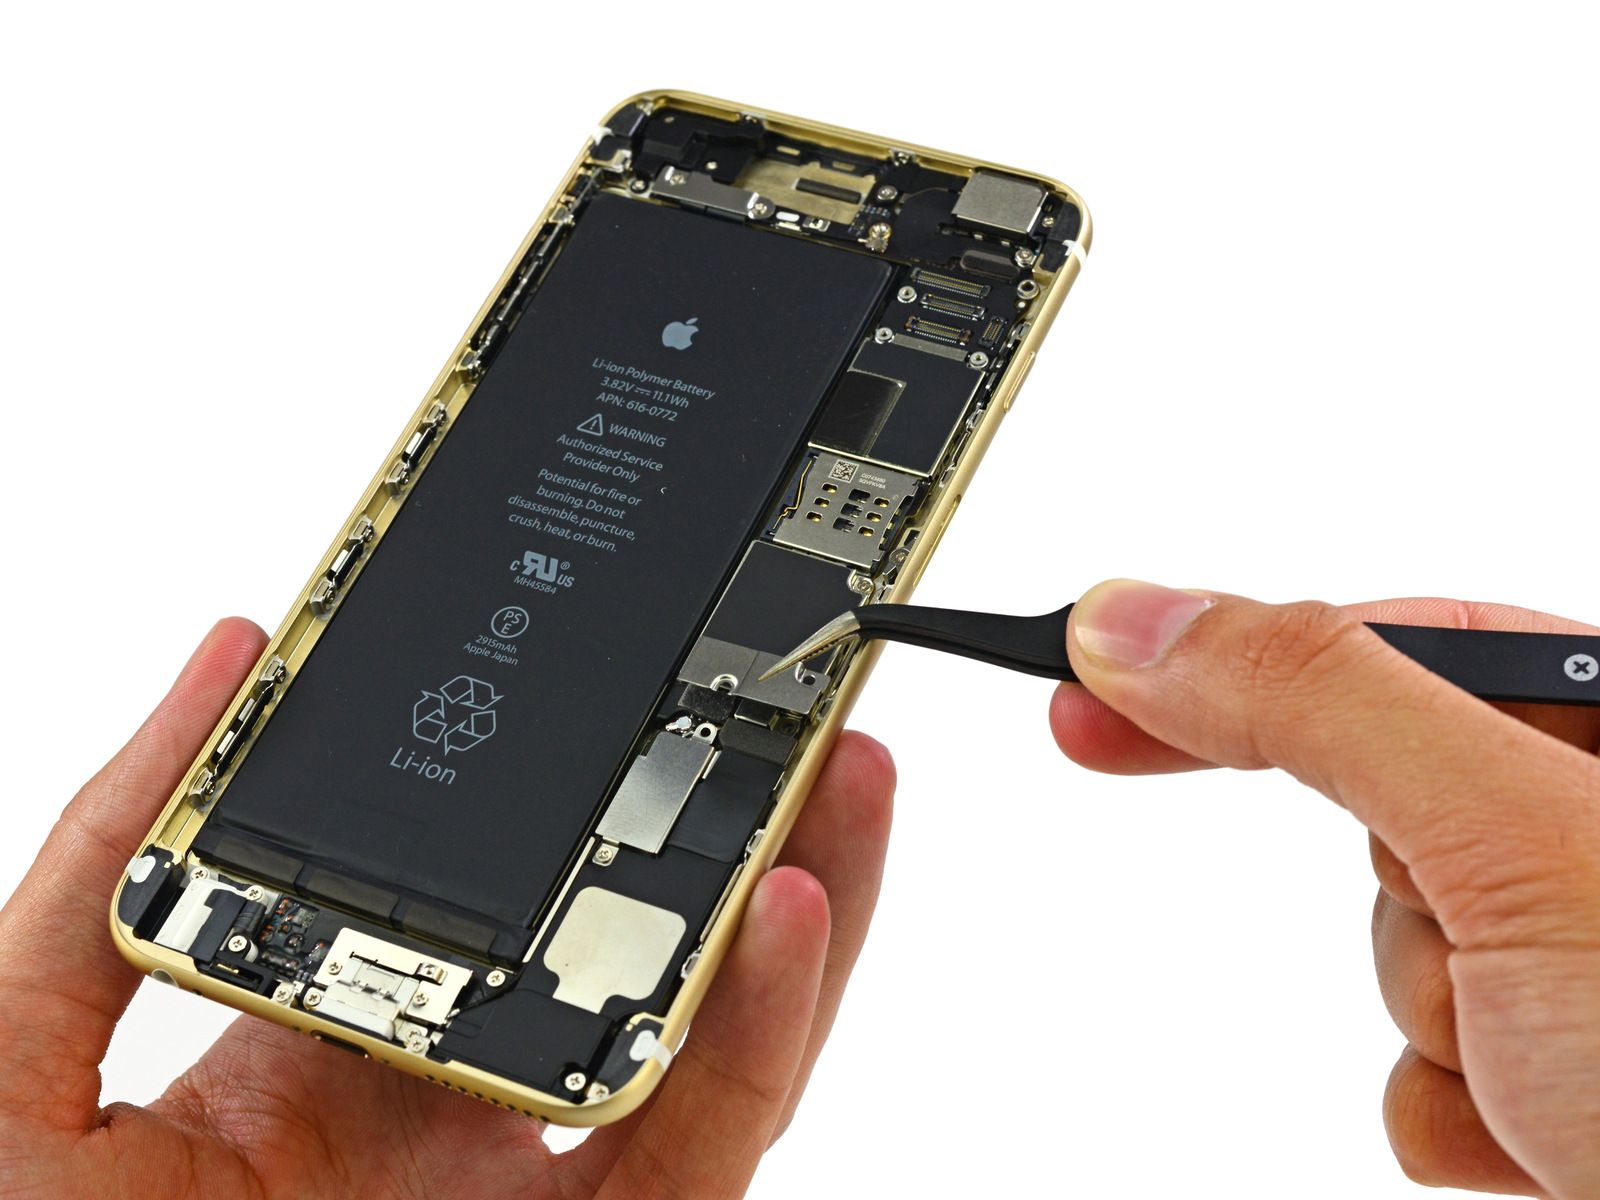 iphone 6 plus teardown reveals it s easier to fix than iphone 5s image 2